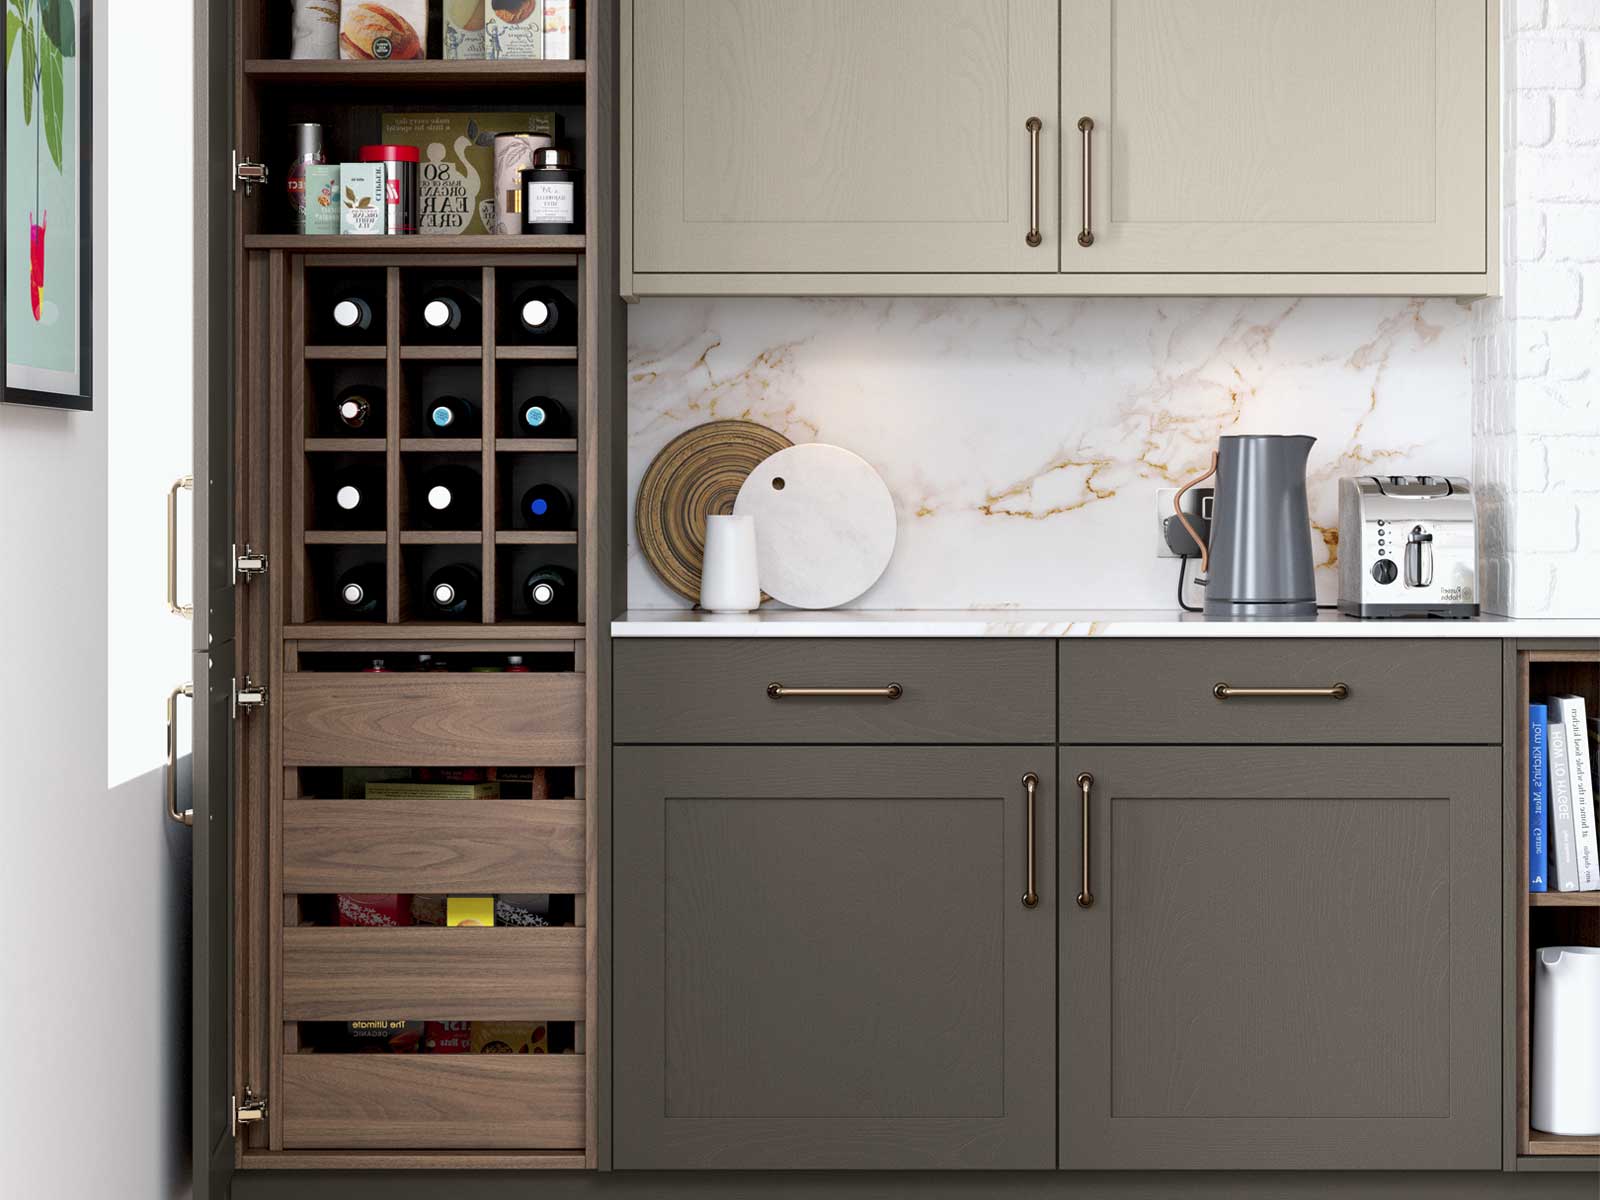 A slimline Hathaway pantry with a dark green and pale grey kitchen range